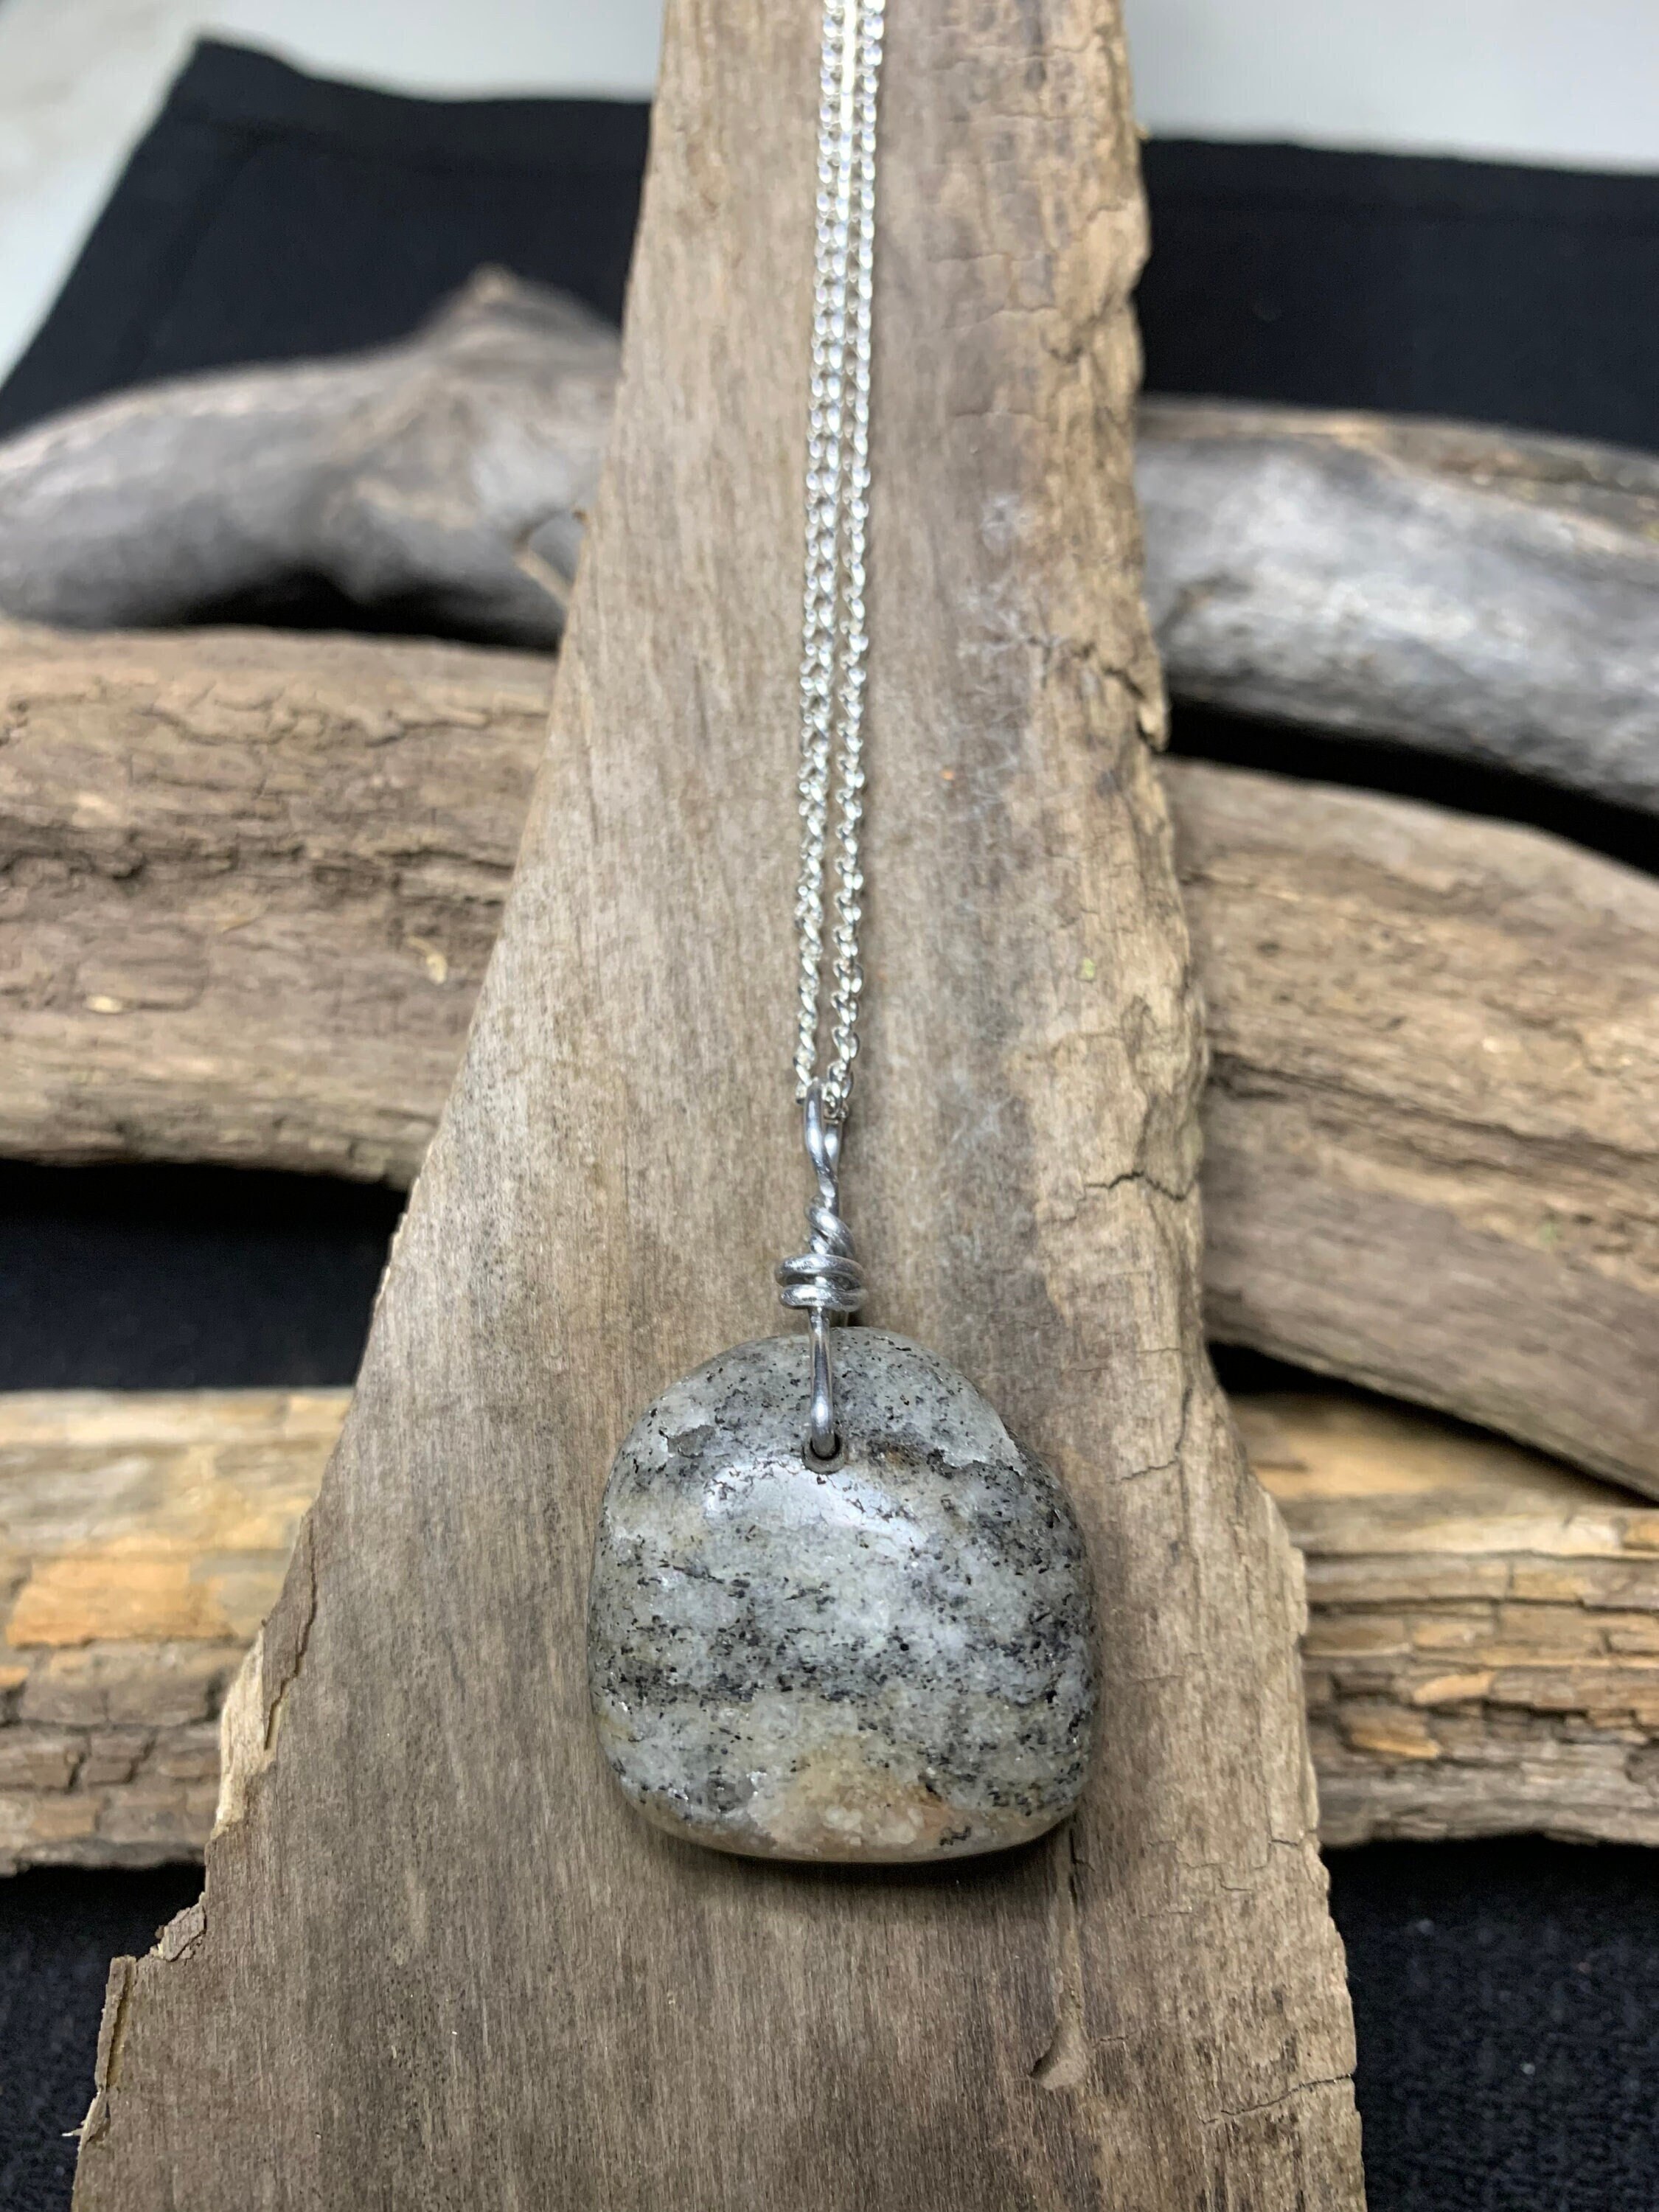 White and Grey Granite Rock Necklace, on an 18-inch Silver-colored